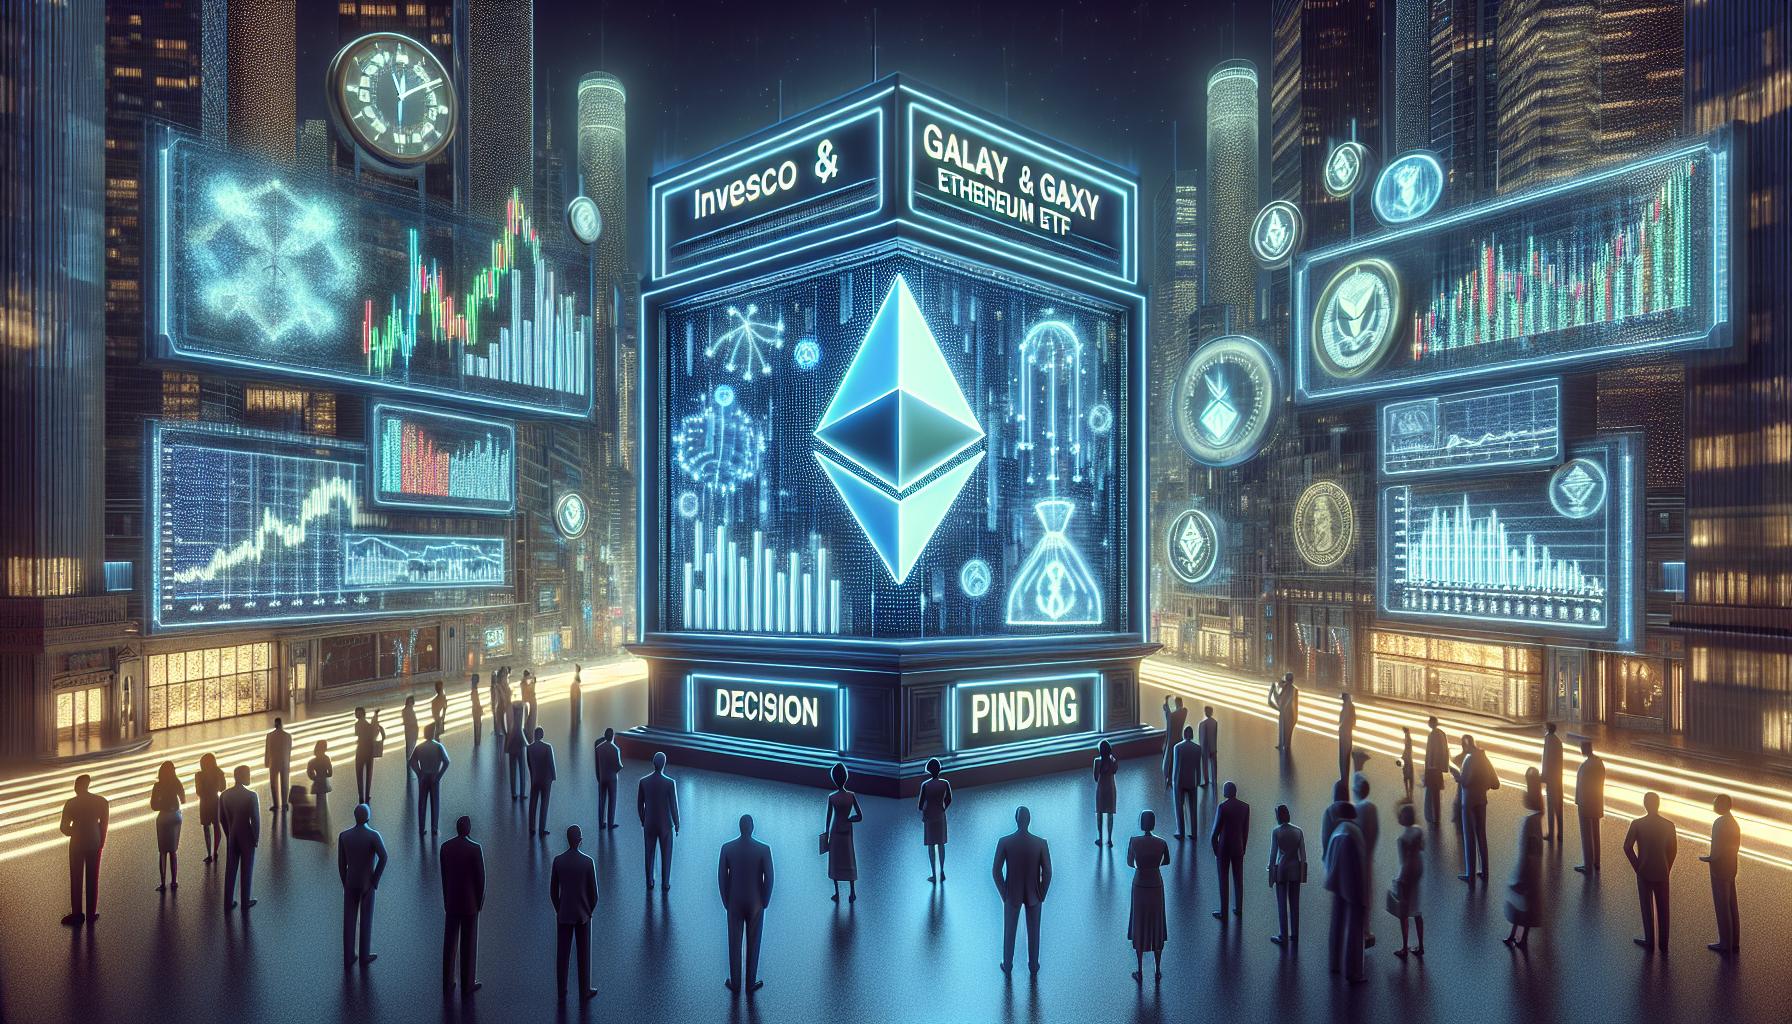 SEC Extends Deadline for Invesco and Galaxy Ethereum ETF Decision | FinOracle